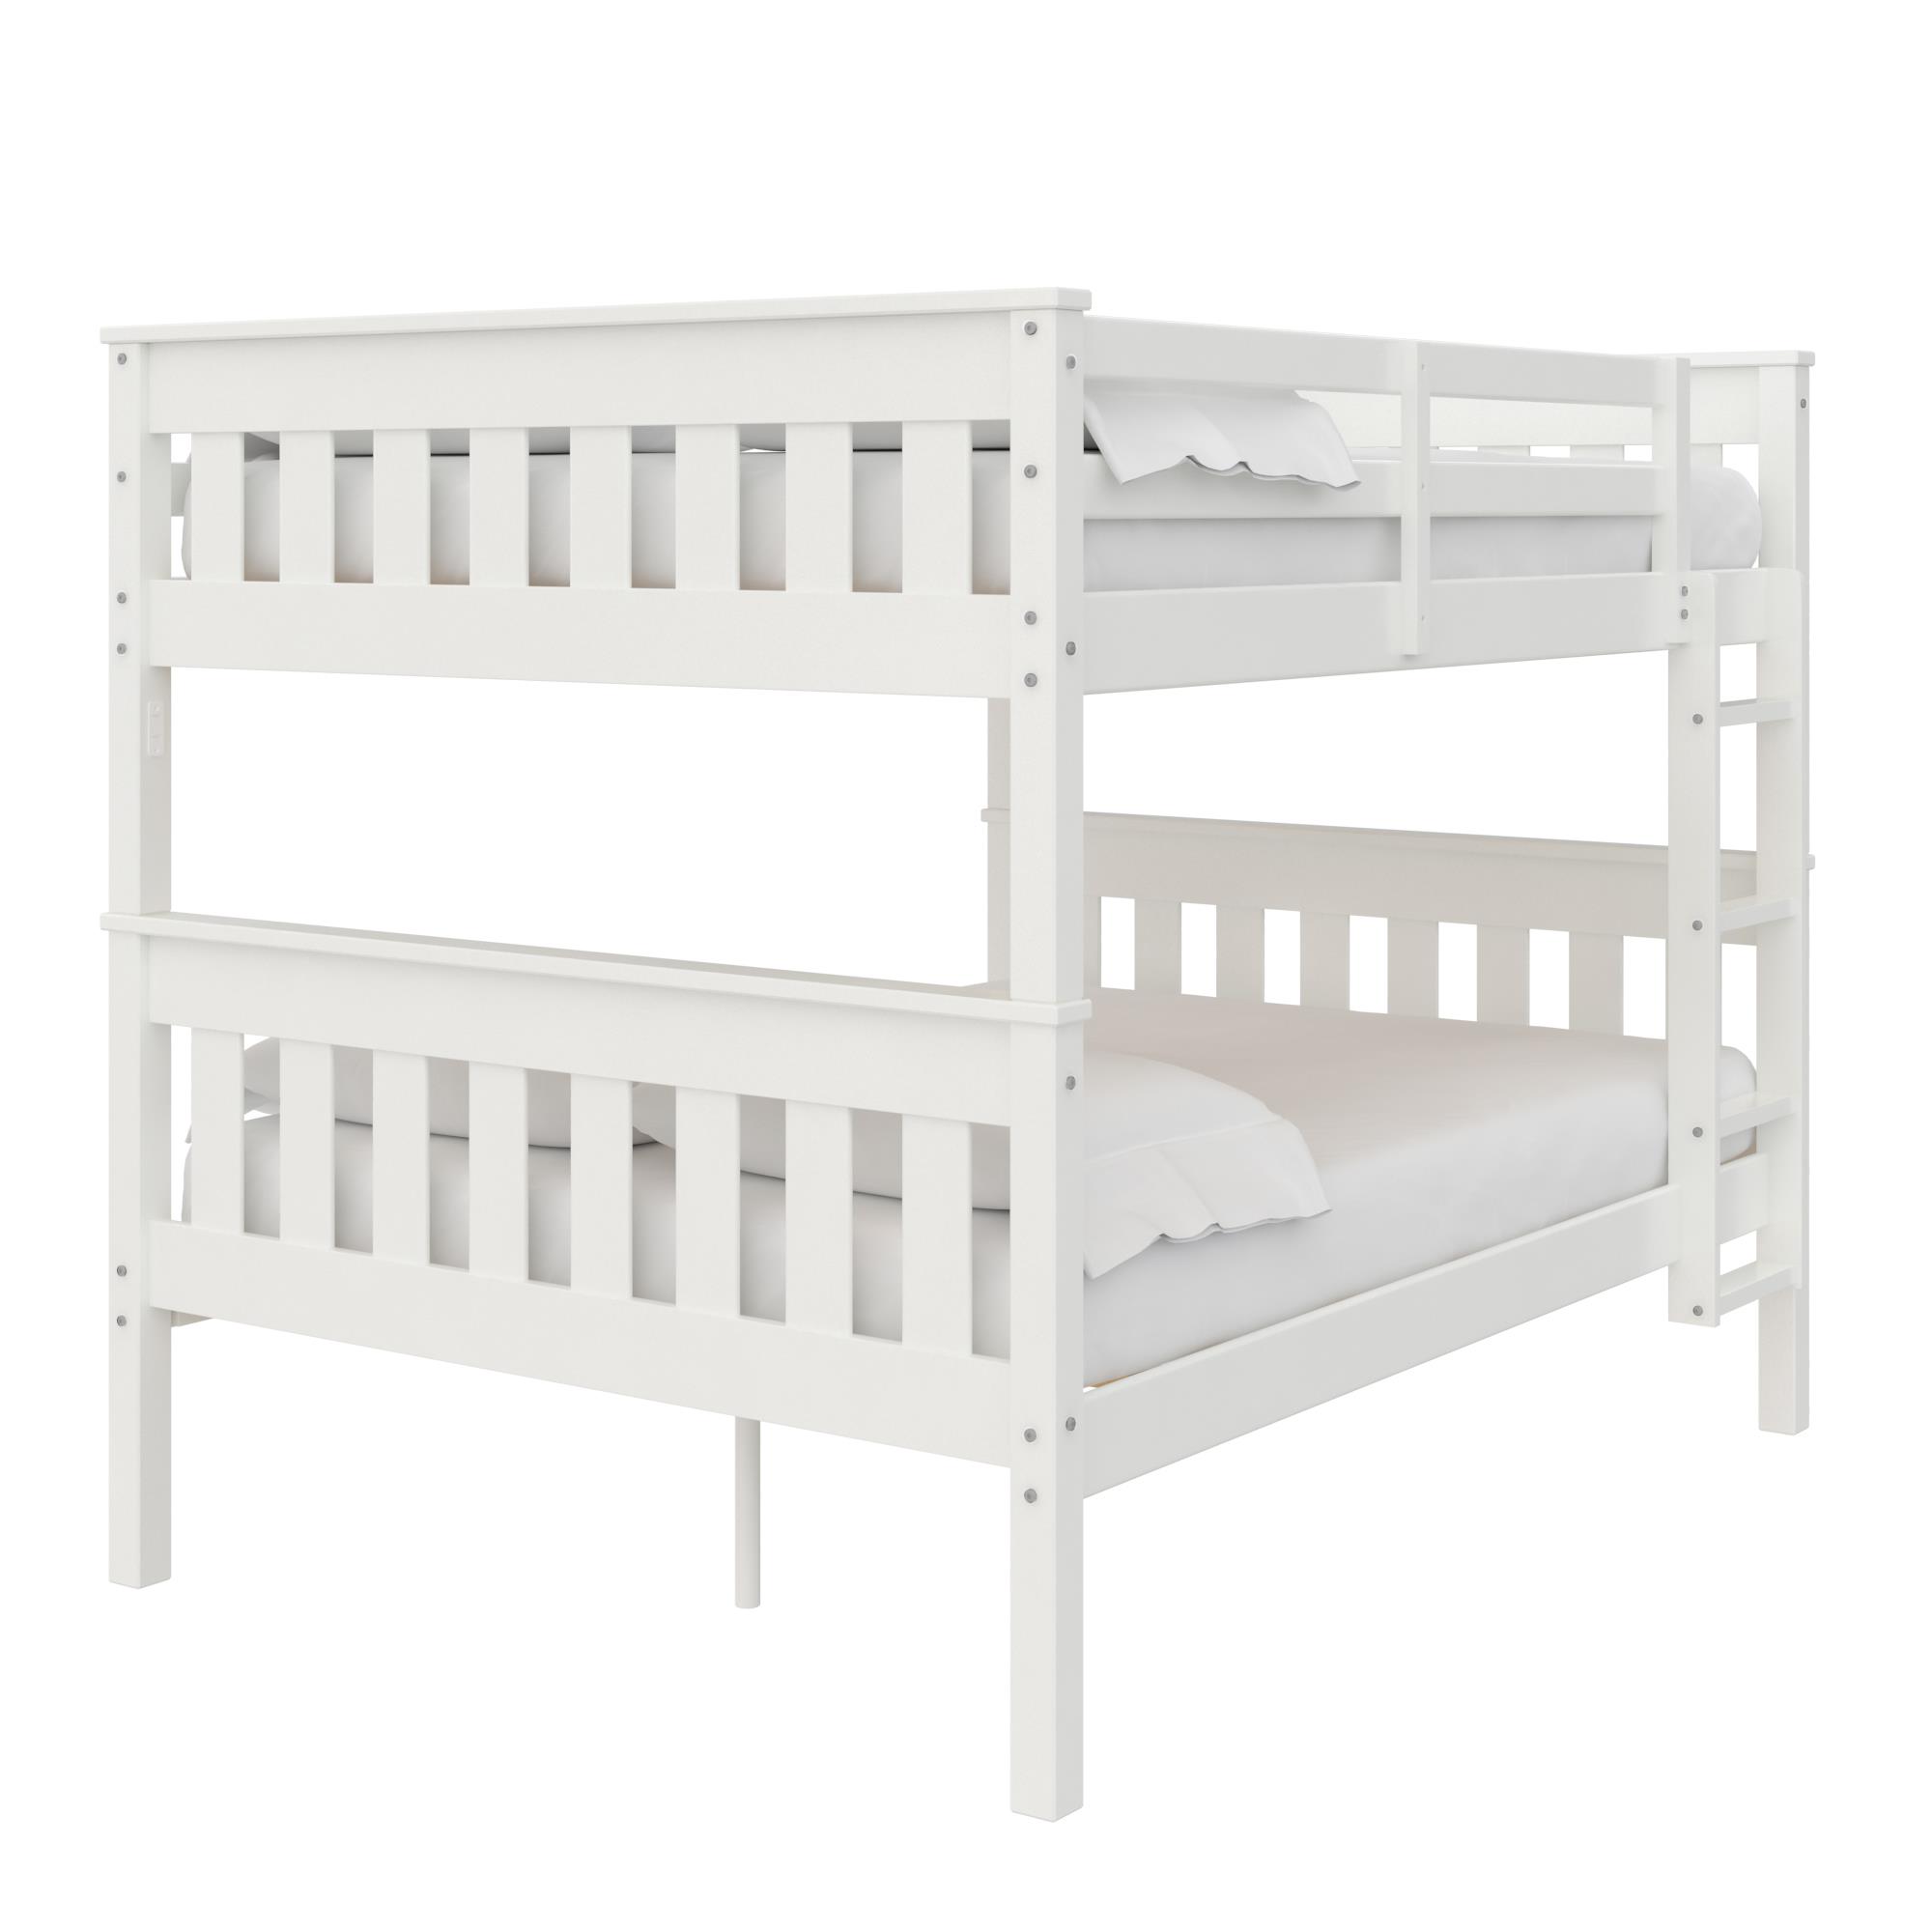 Dorel Living Moon Bunk Bed with USB in Full/Full in White - image 5 of 9